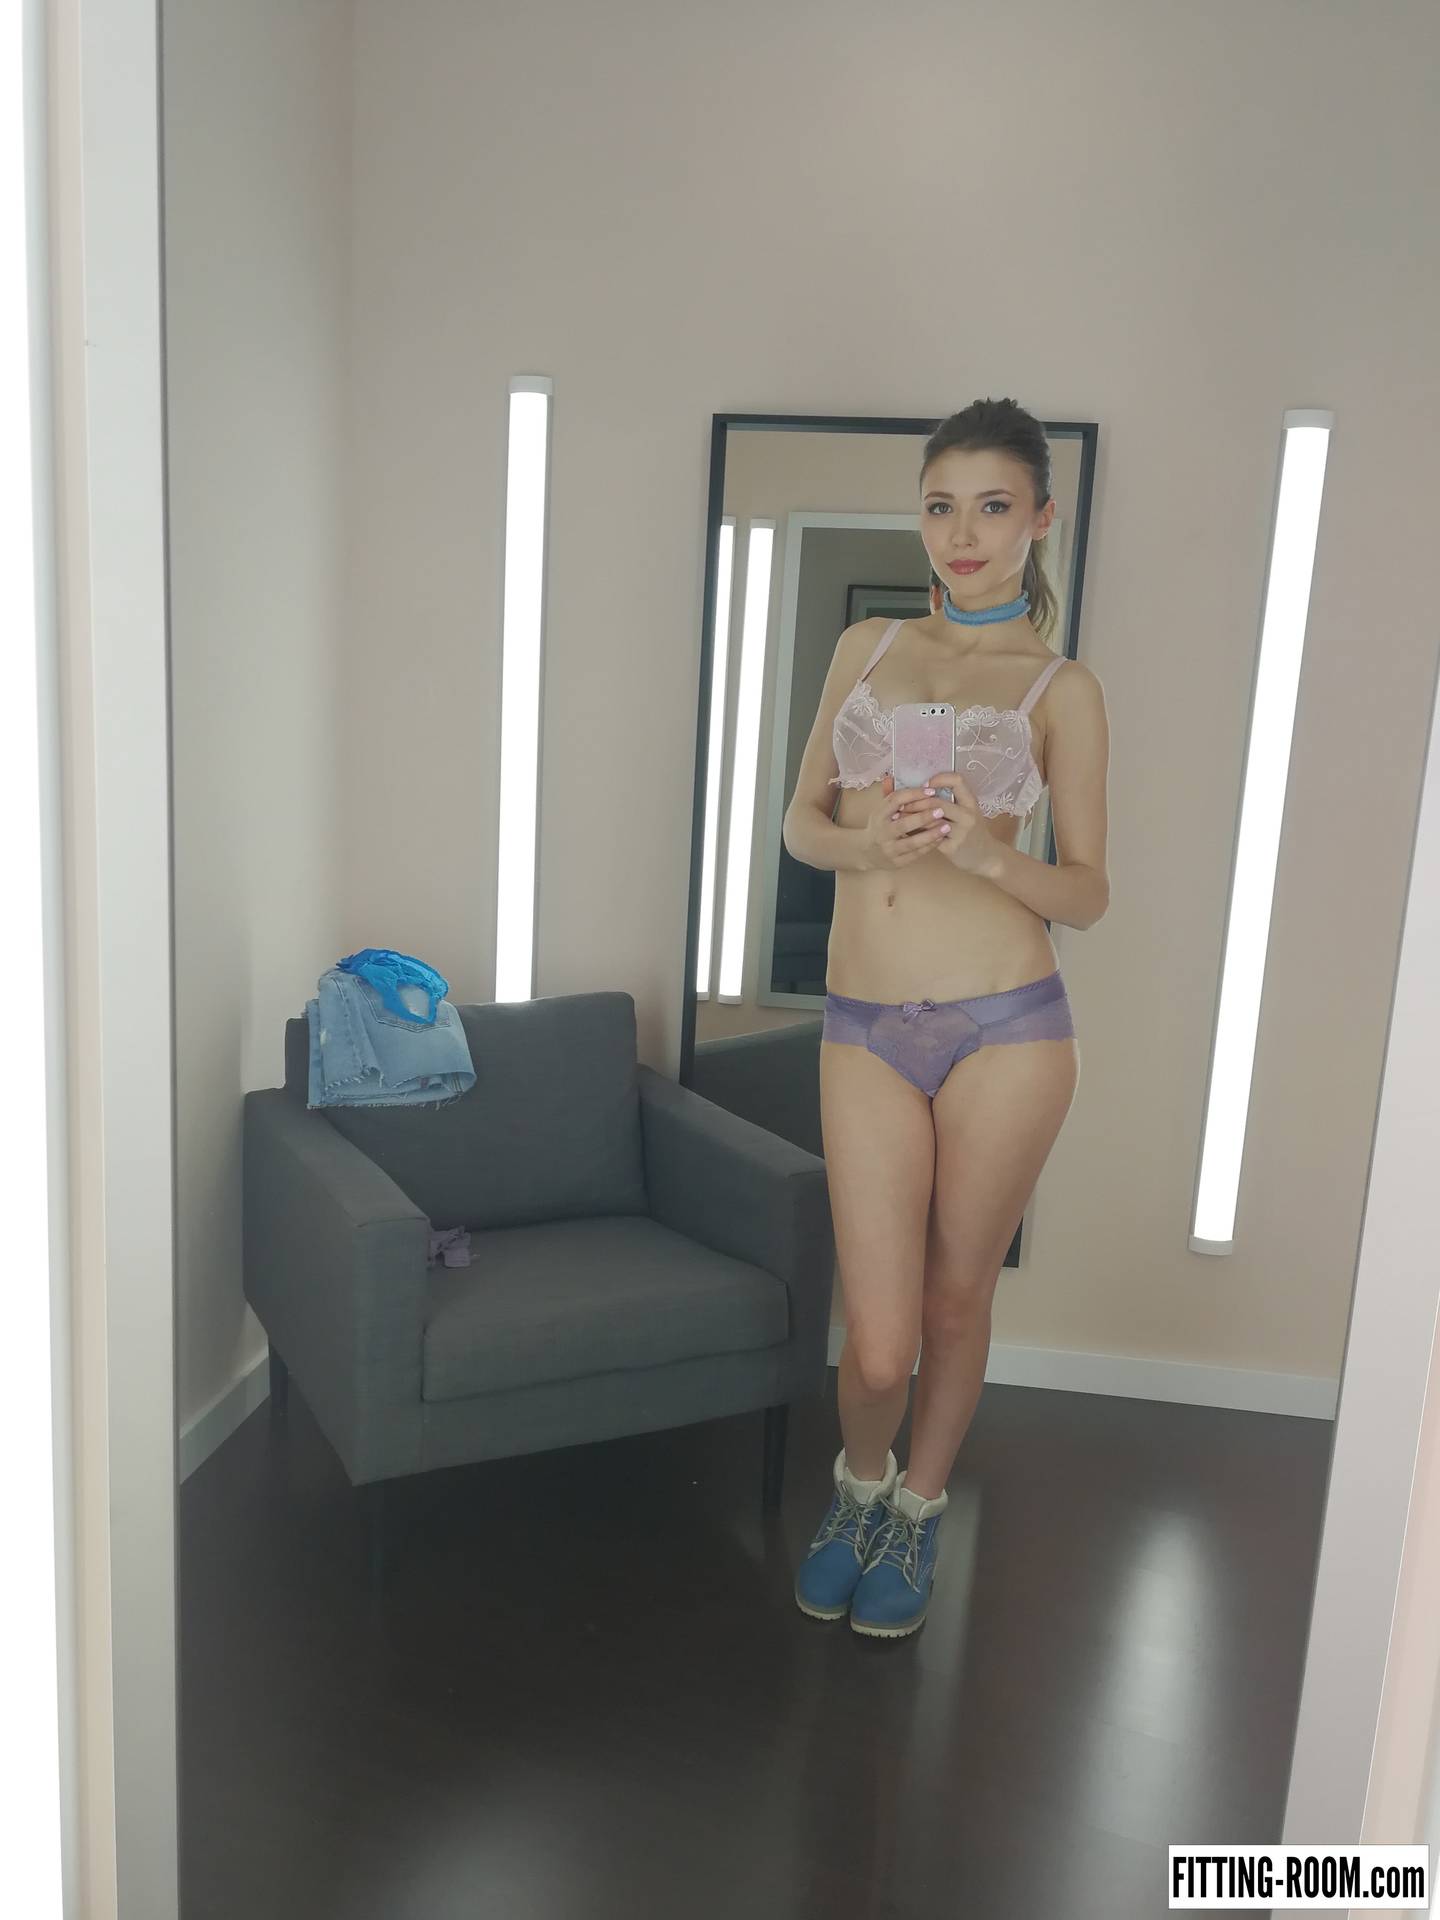 https://www.fitting-room.com/contents/albums/main/1920x1920/0/176/6[600-999].jpg